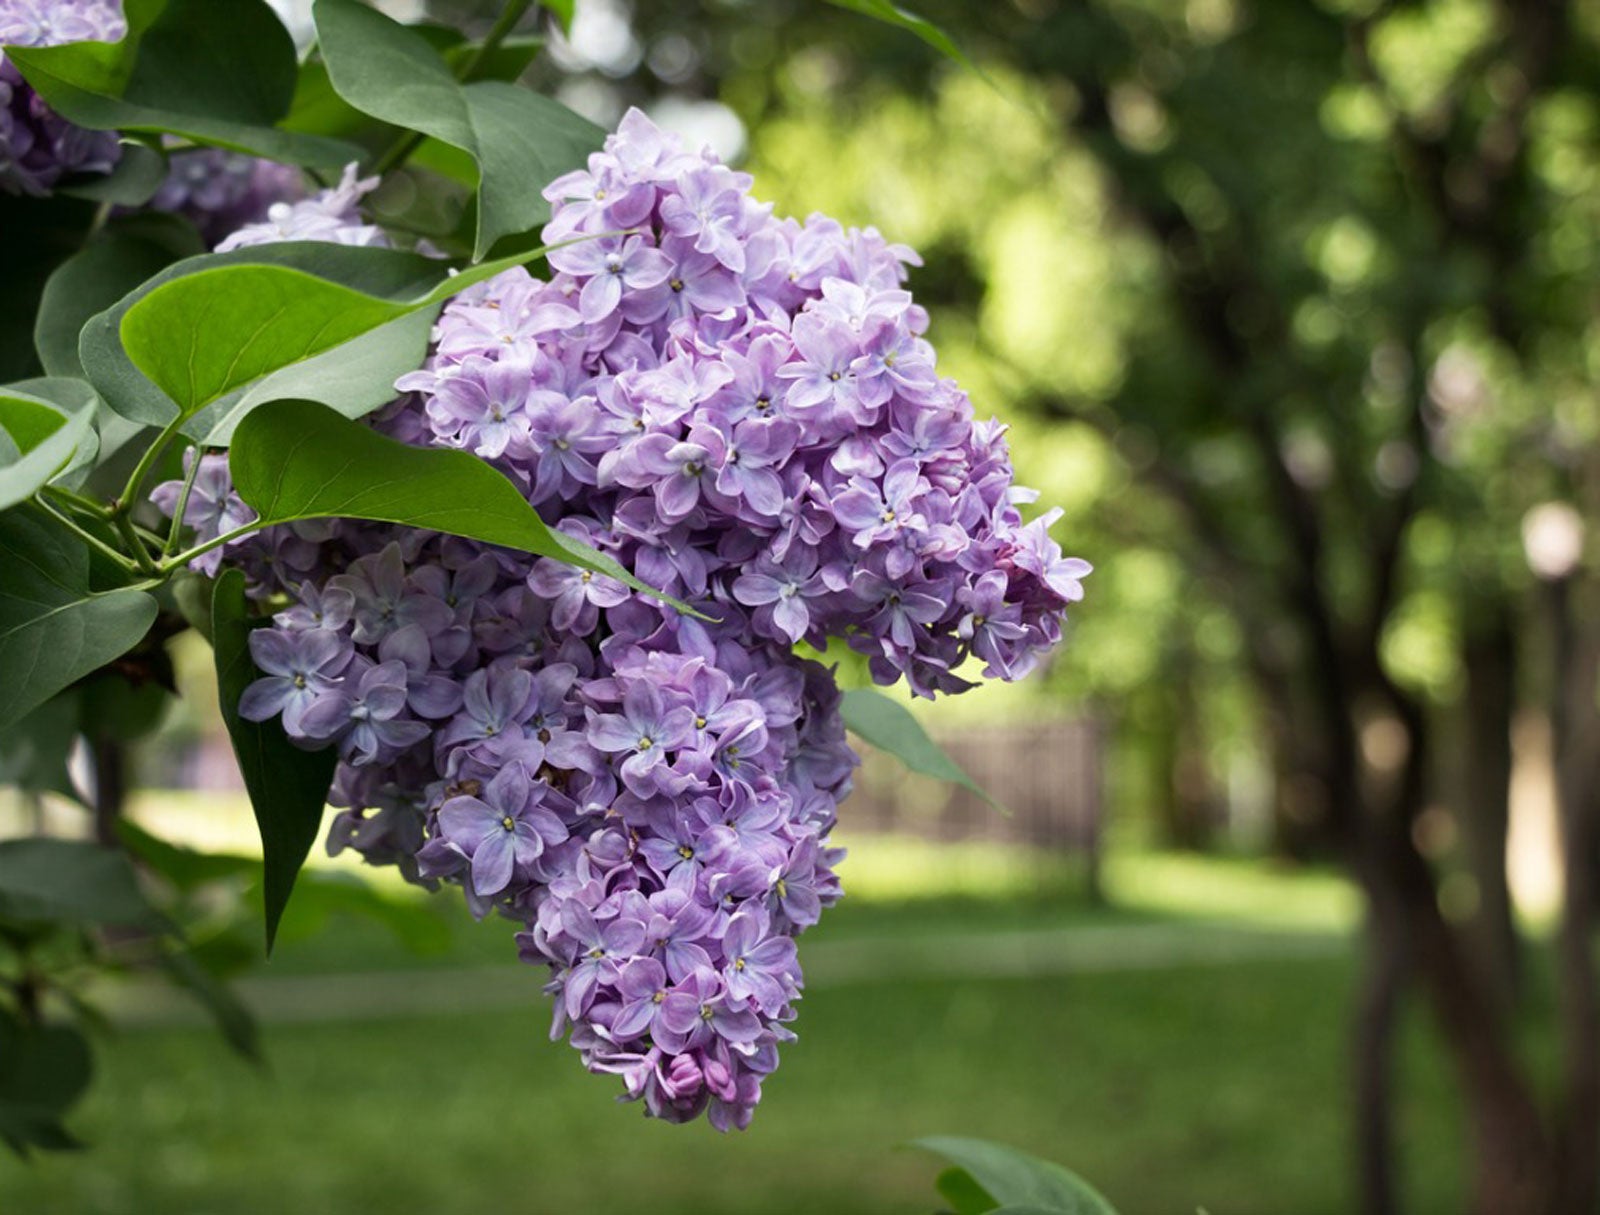 Blooming: How Bush Why Is Flowers Gardening A | My Reasons Know Lilac Not Lilac Never